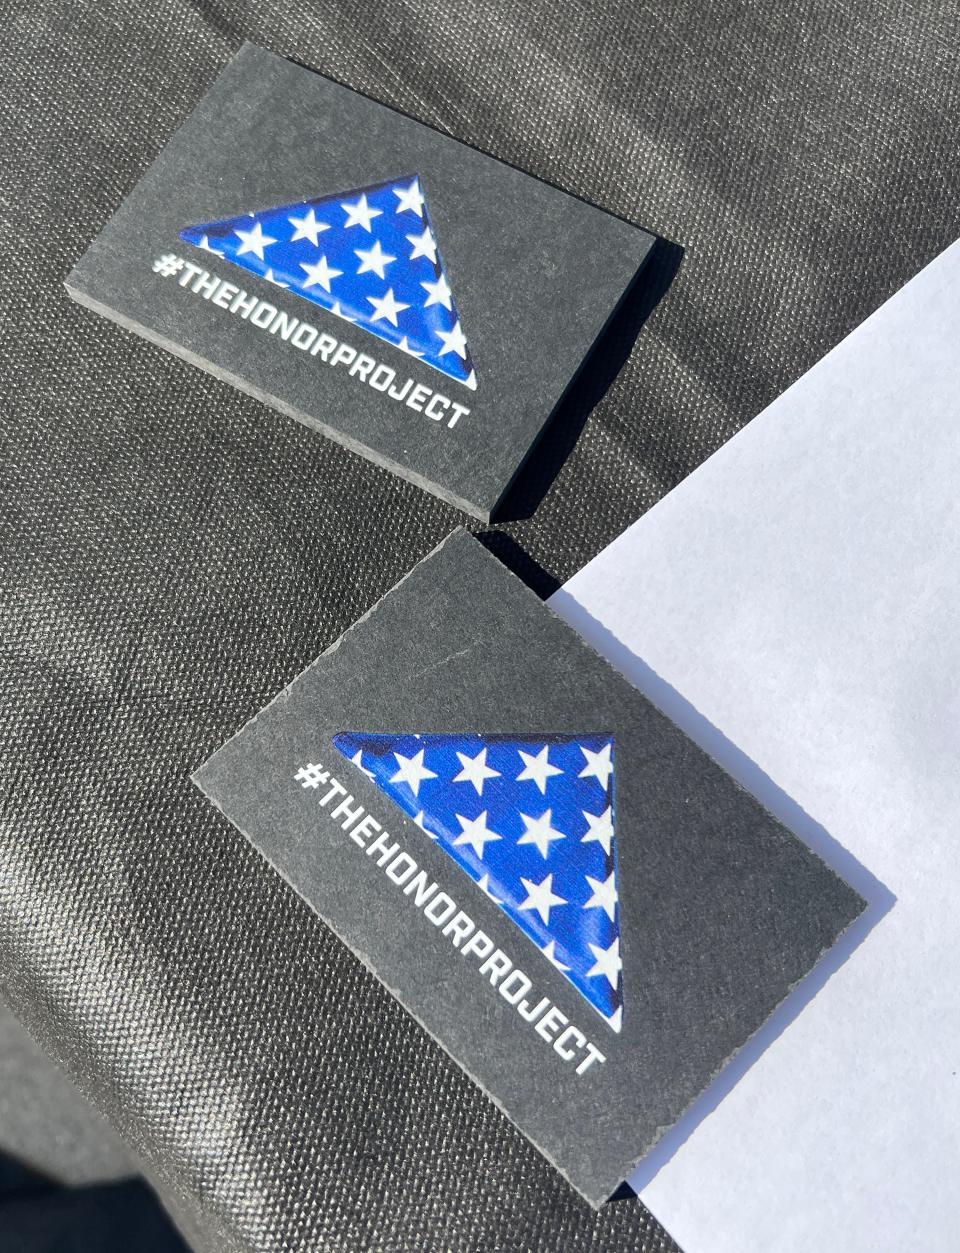 These #Honor Project commemorative tokens were placed on the graves at 14 national cemeteries, including Jacksonville.